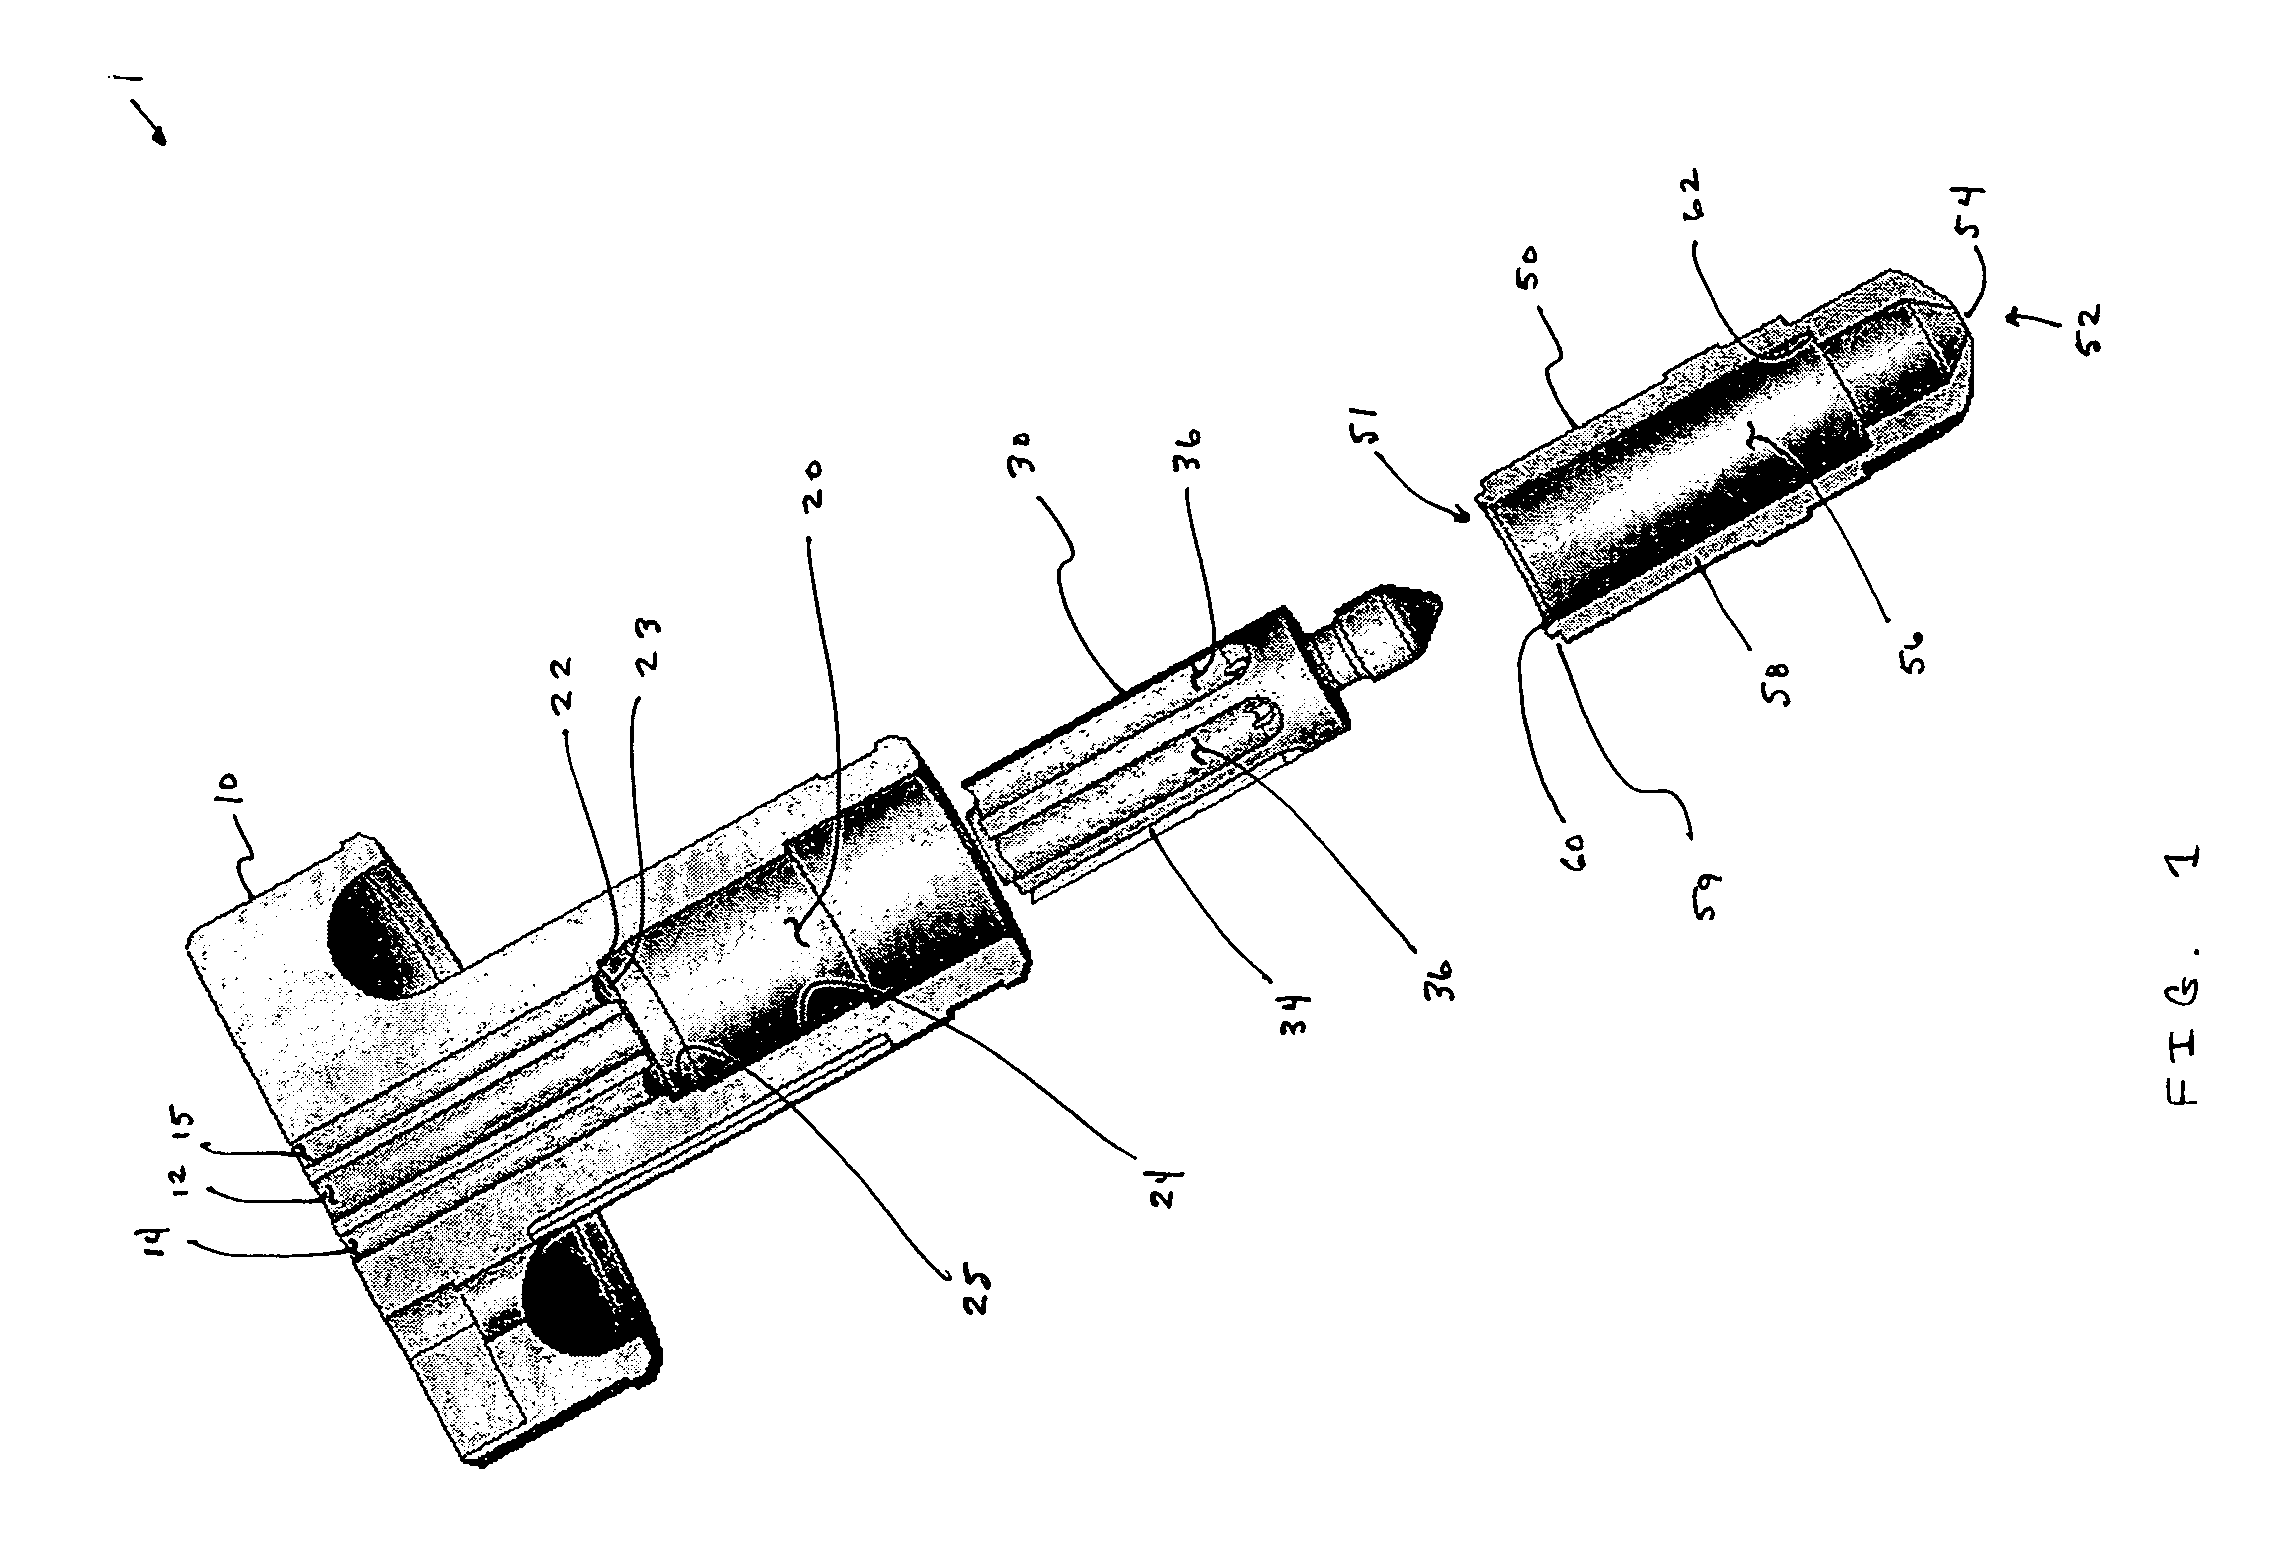 Co-injection nozzle, method of its use, and resulting golf ball